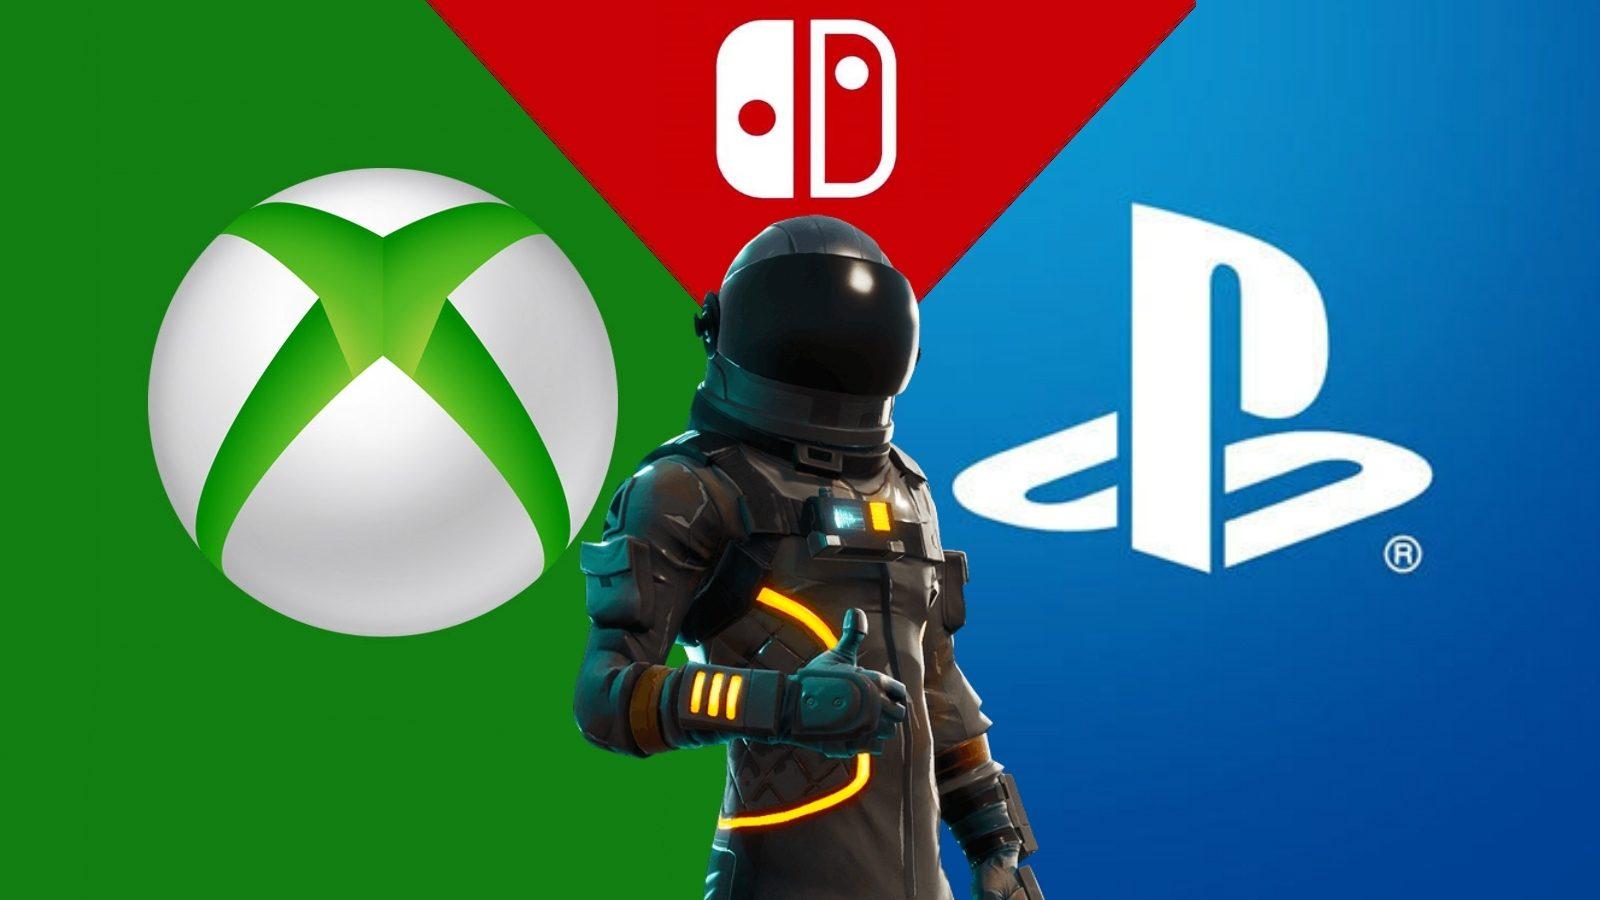 PS4 & Xbox One cross-play briefly enabled for Fortnite